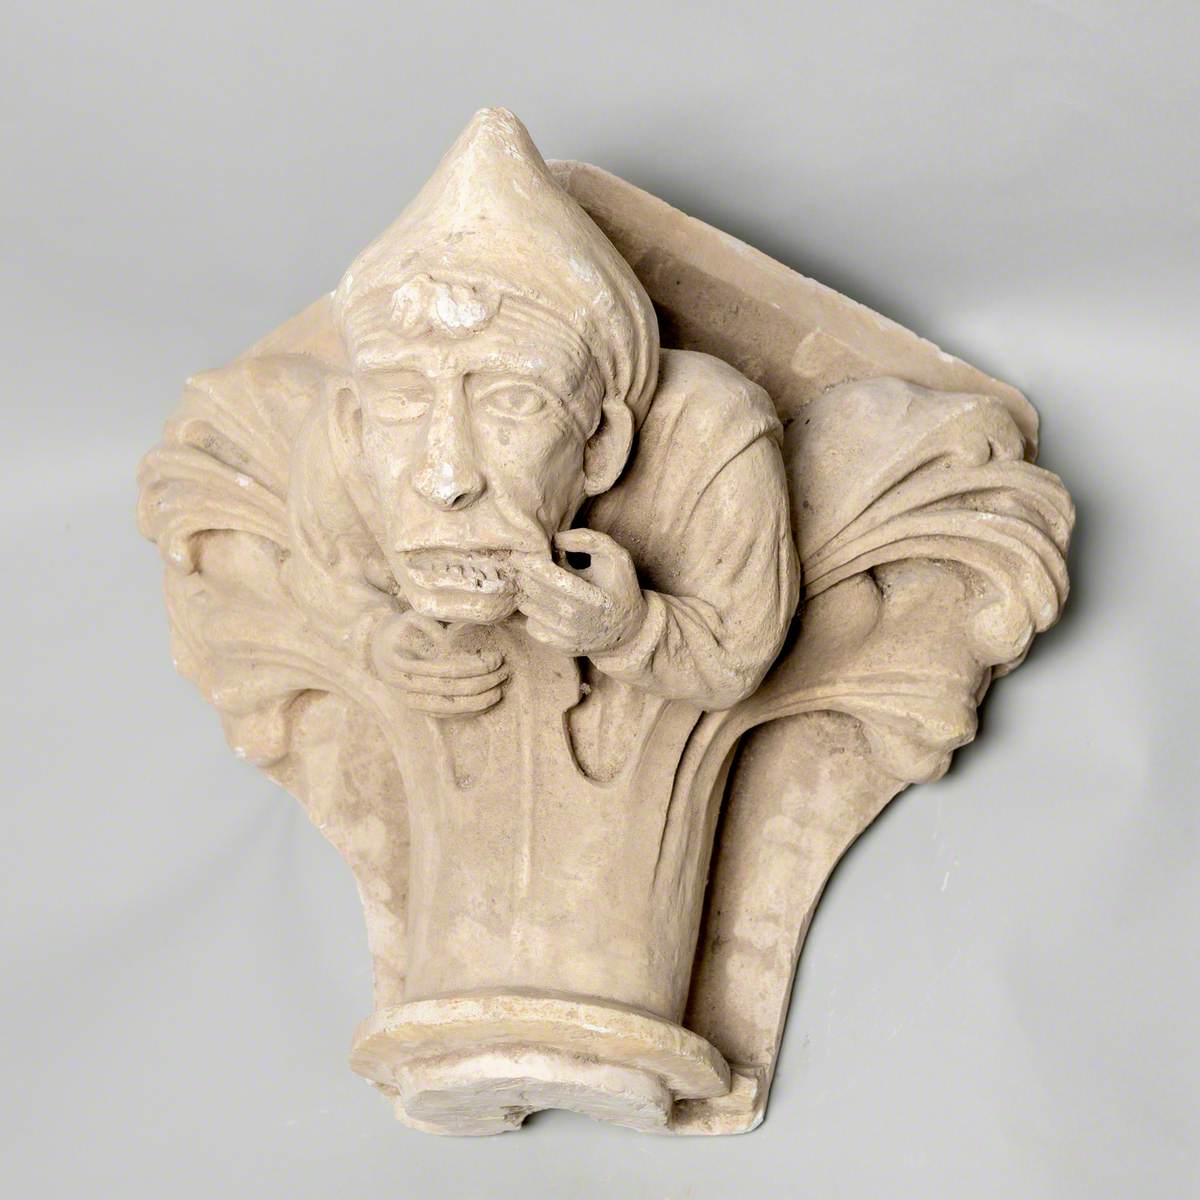 Column Capital Showing a Man Pulling a Face